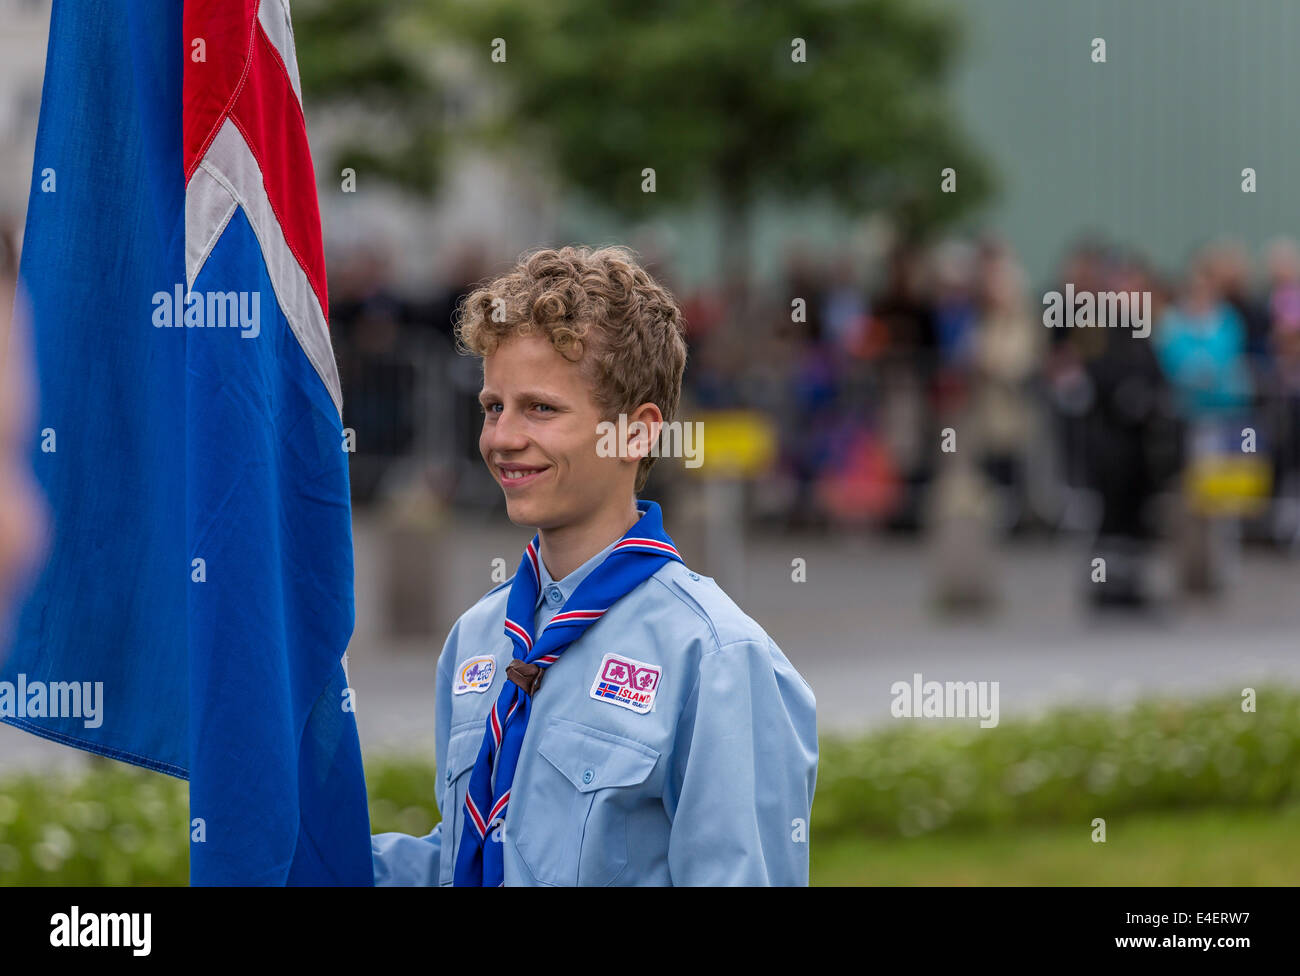 Portrait of Icelandic Boy Scout holding a flag during a parade for Independence day, June 17. Reykjavik, Iceland Stock Photo